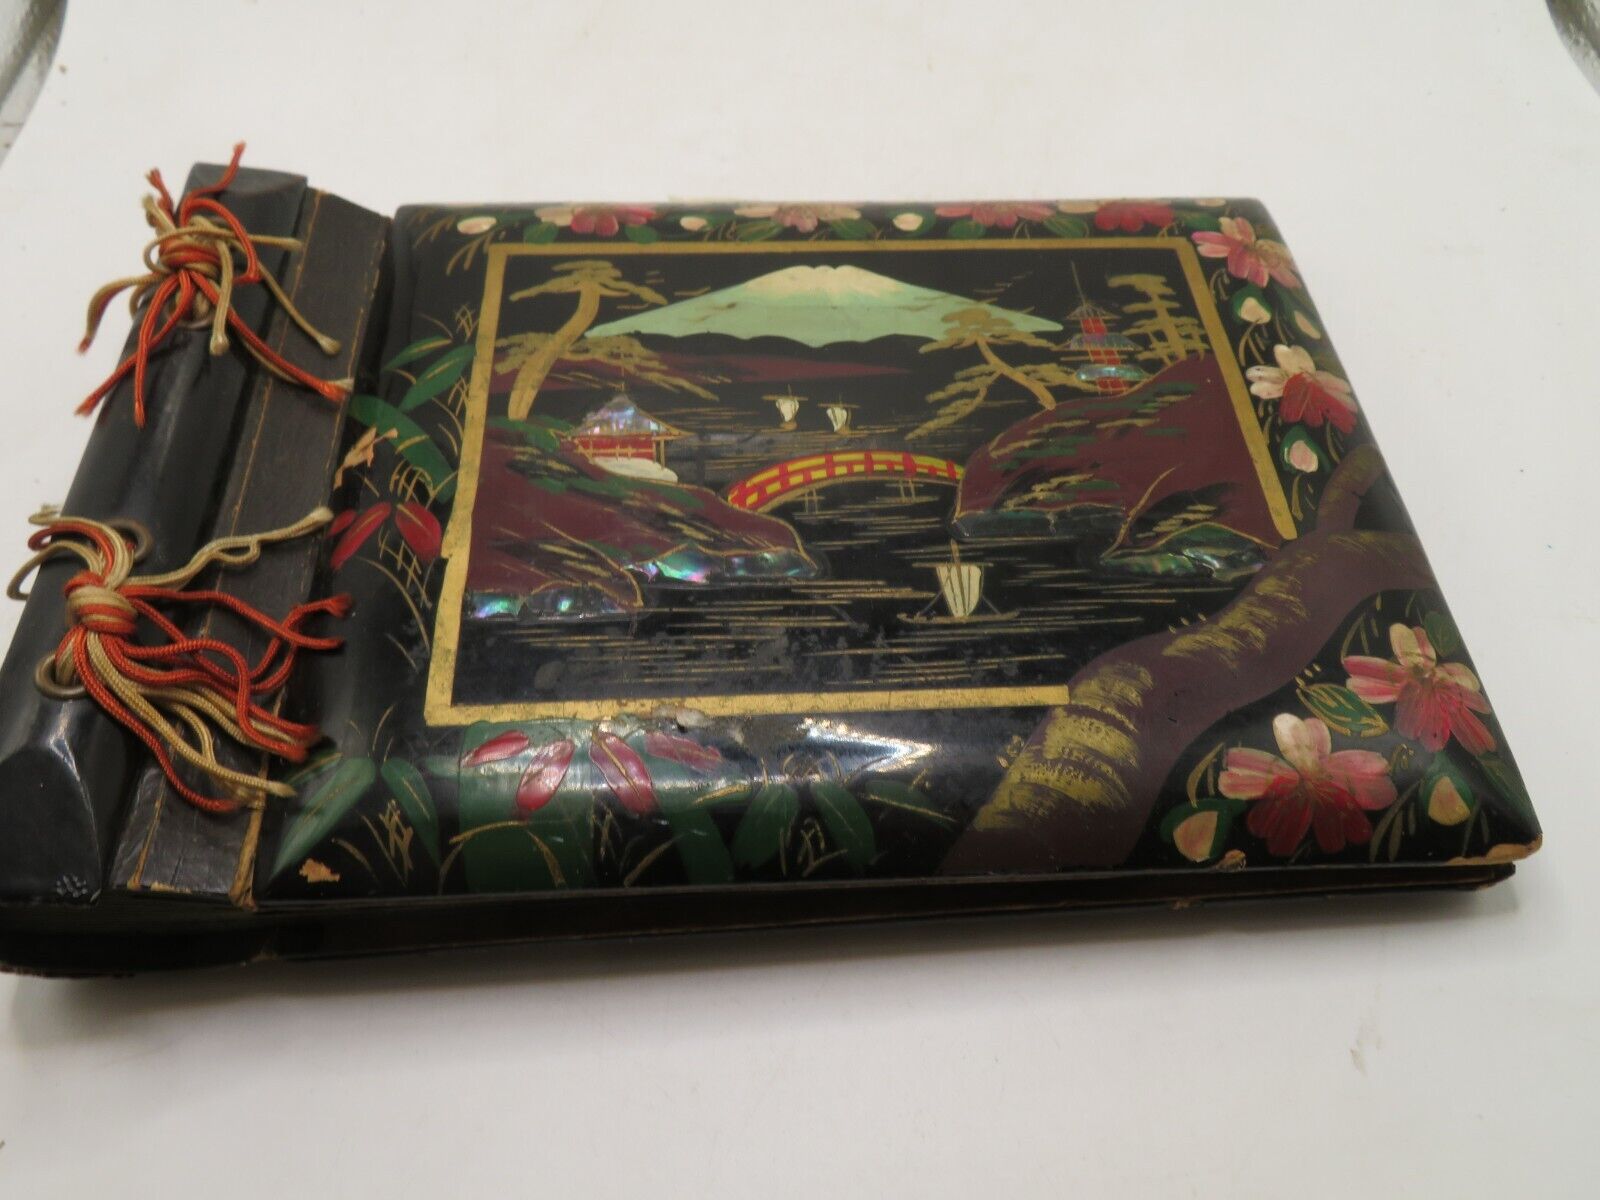 Rare Vintage Unused Hand Painted Photo Album Asian Inspired Cultural Theme